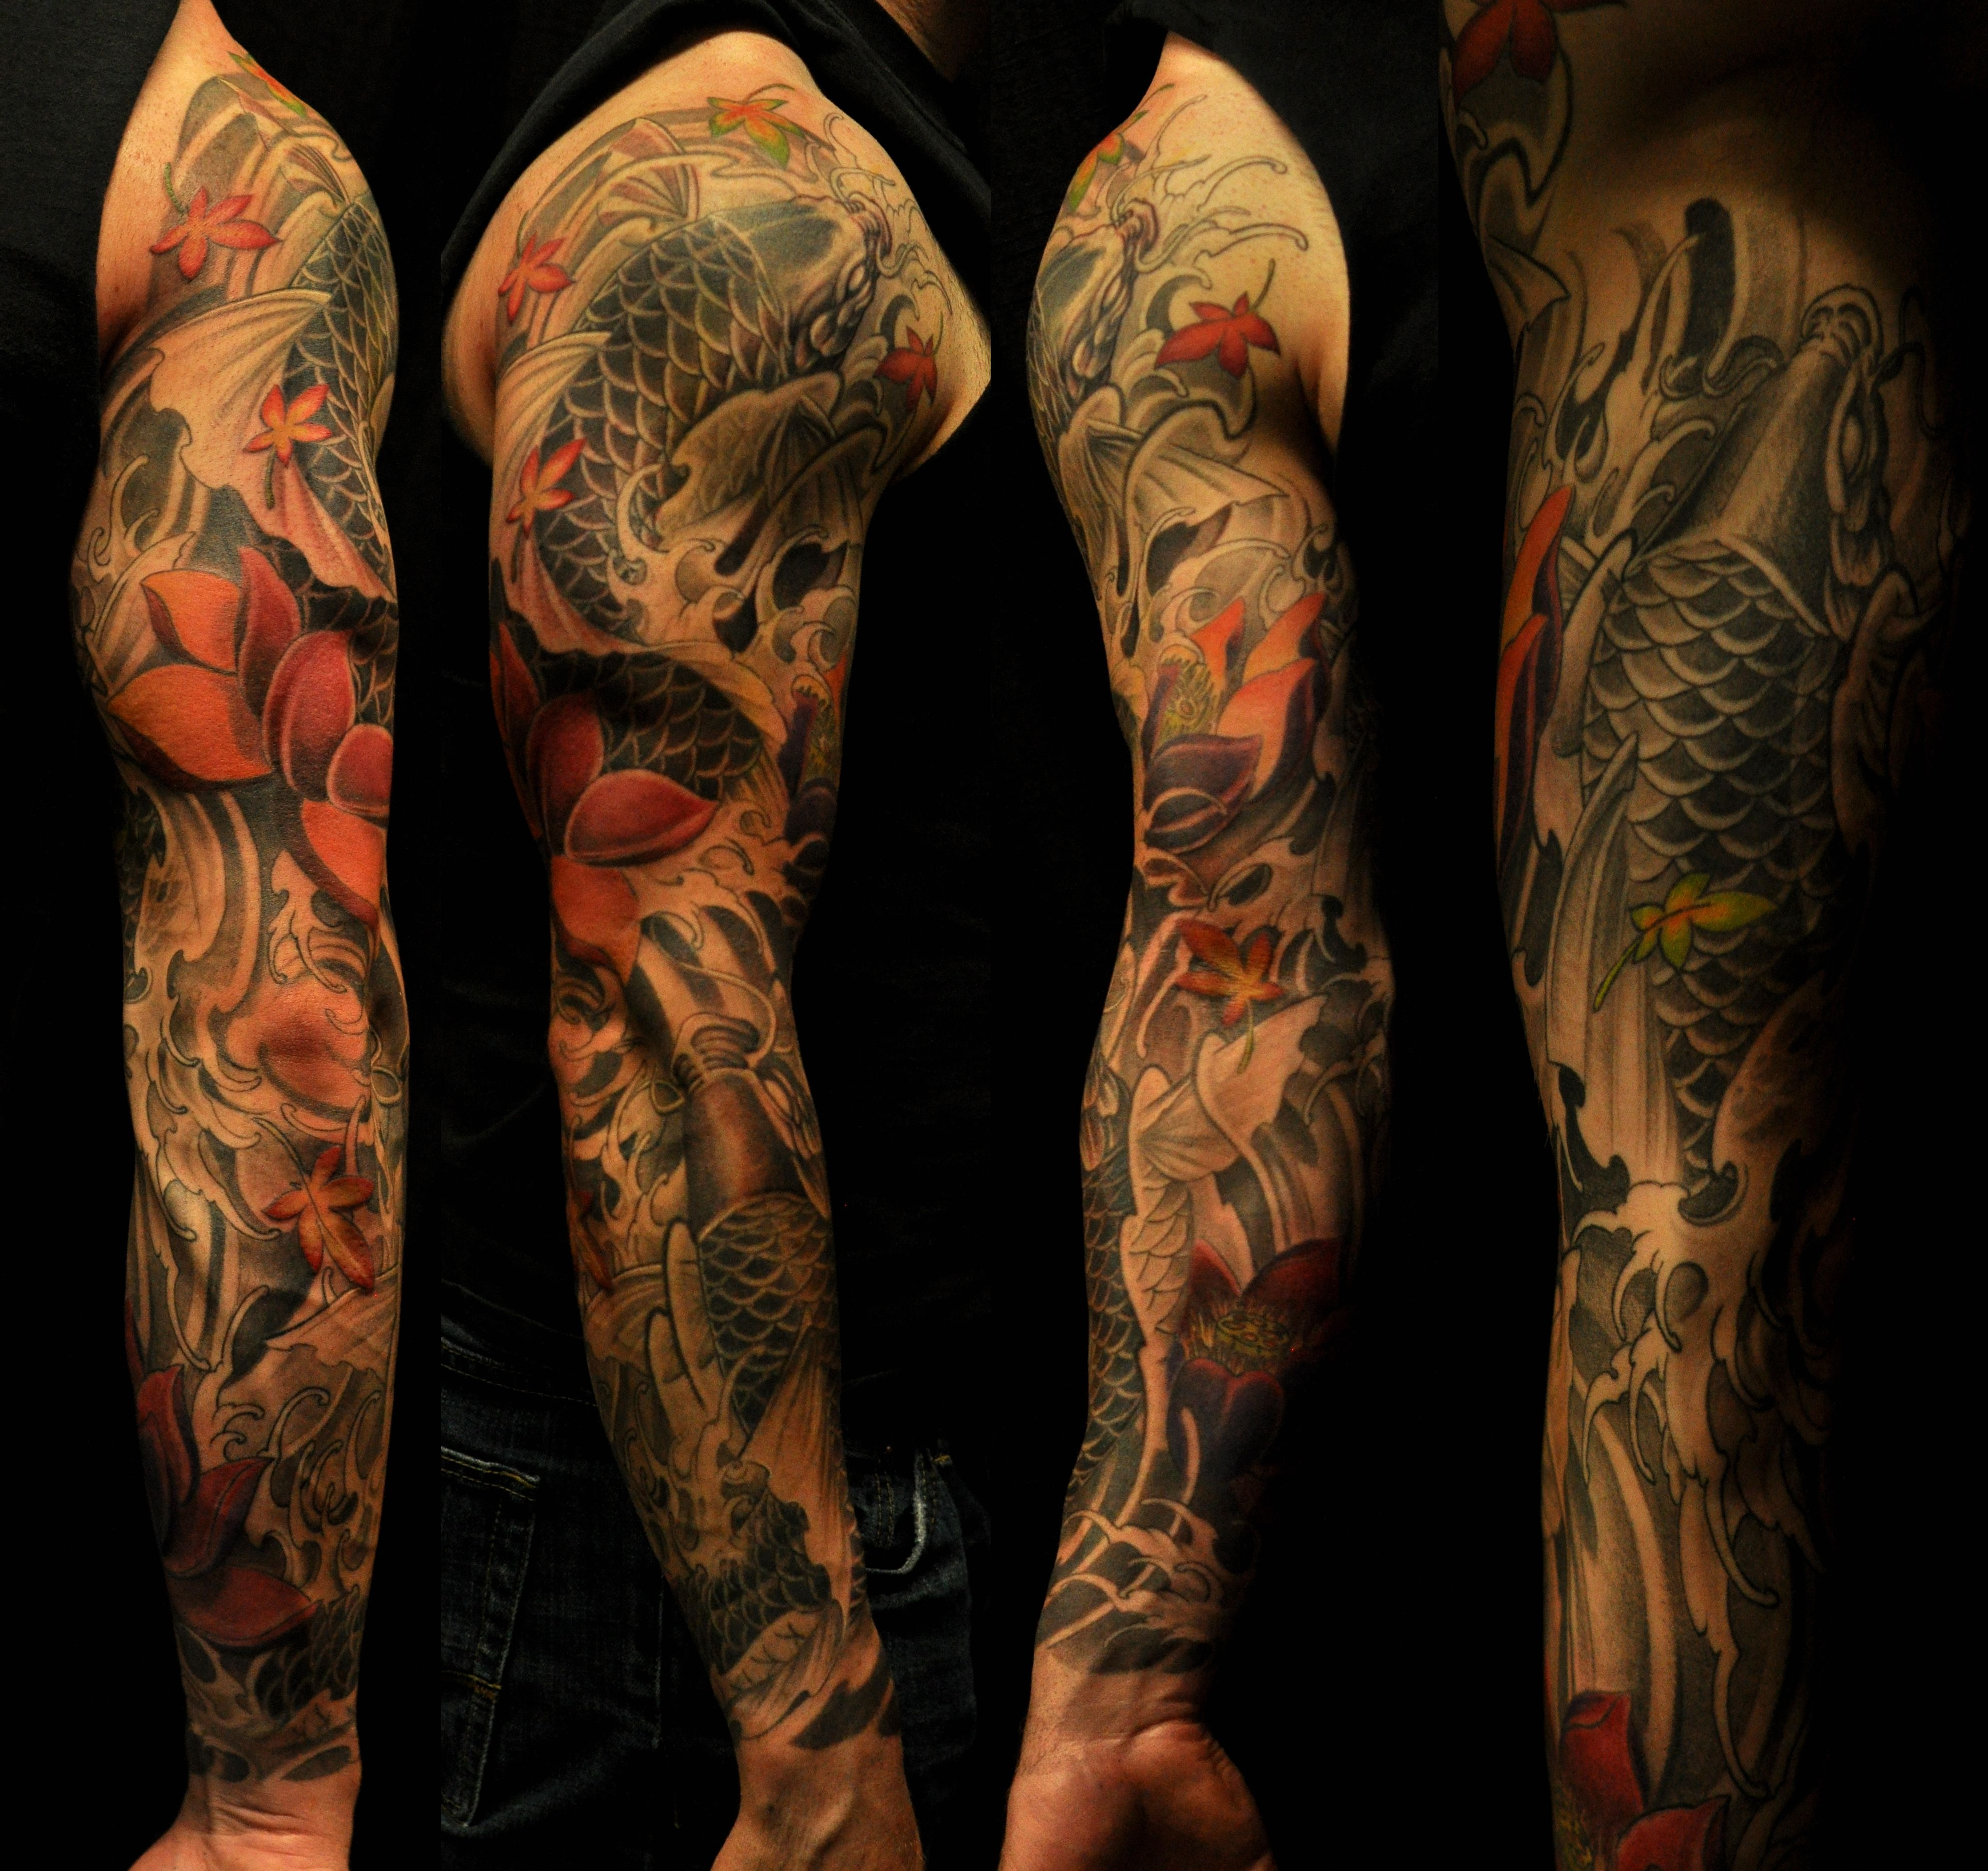 Koi Fish Tattoo Sleeve Black And Grey Nyaduts Pictures To Pin On regarding dimensions 3972 X 3738